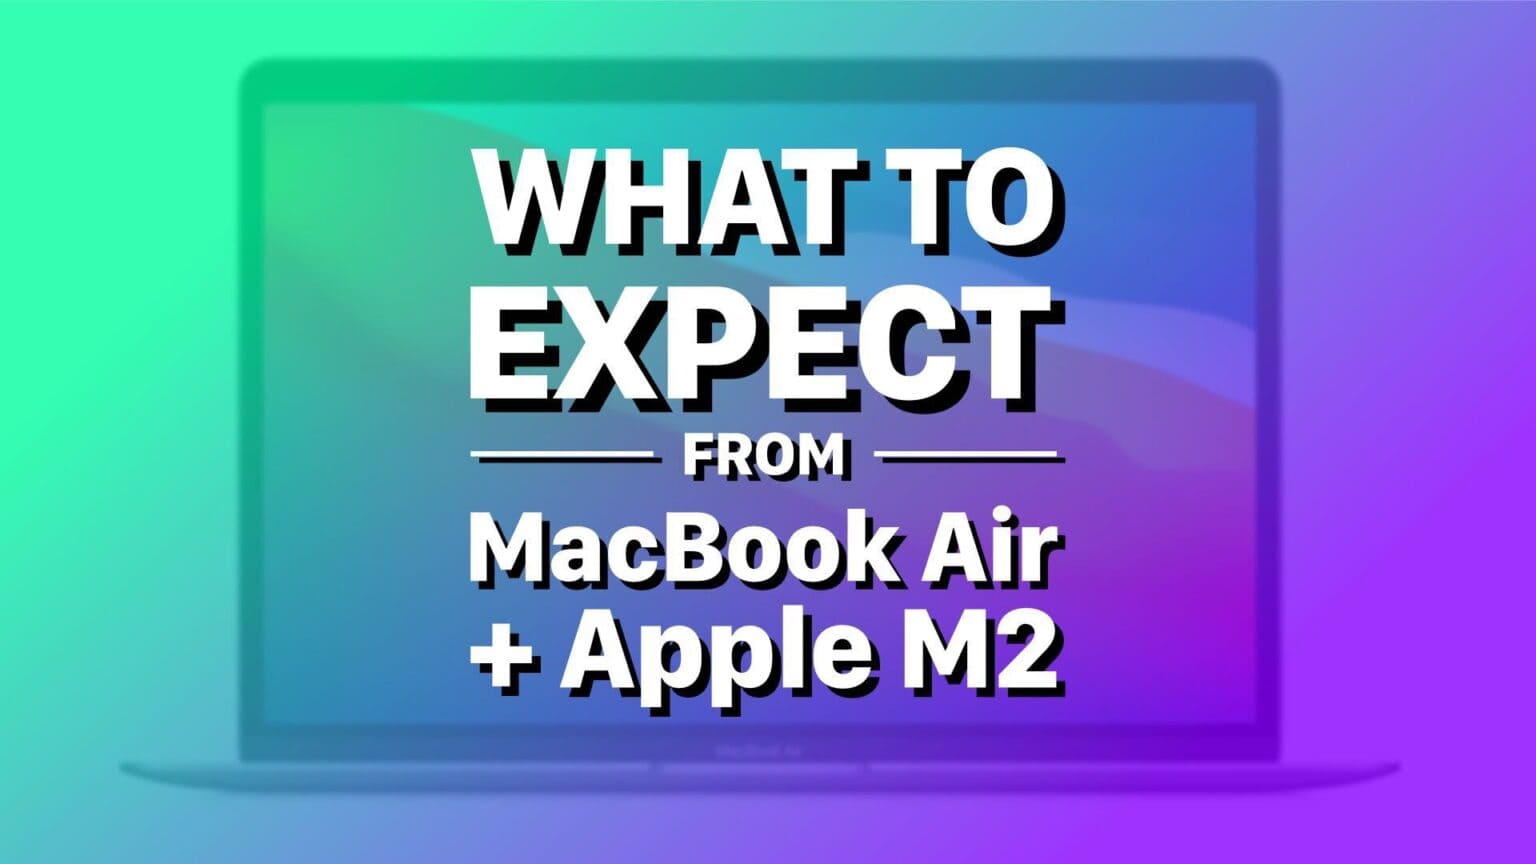 What to expect from MacBook Air and the M2 processor in 2022